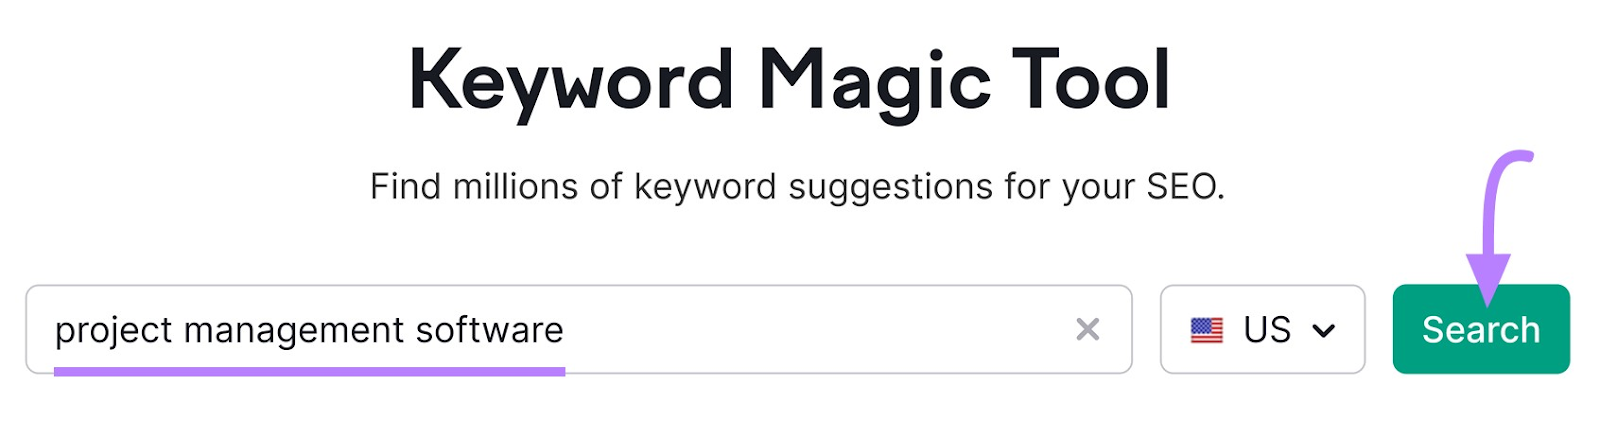 "project absorption   software" entered into the Keyword Magic Tool hunt  bar